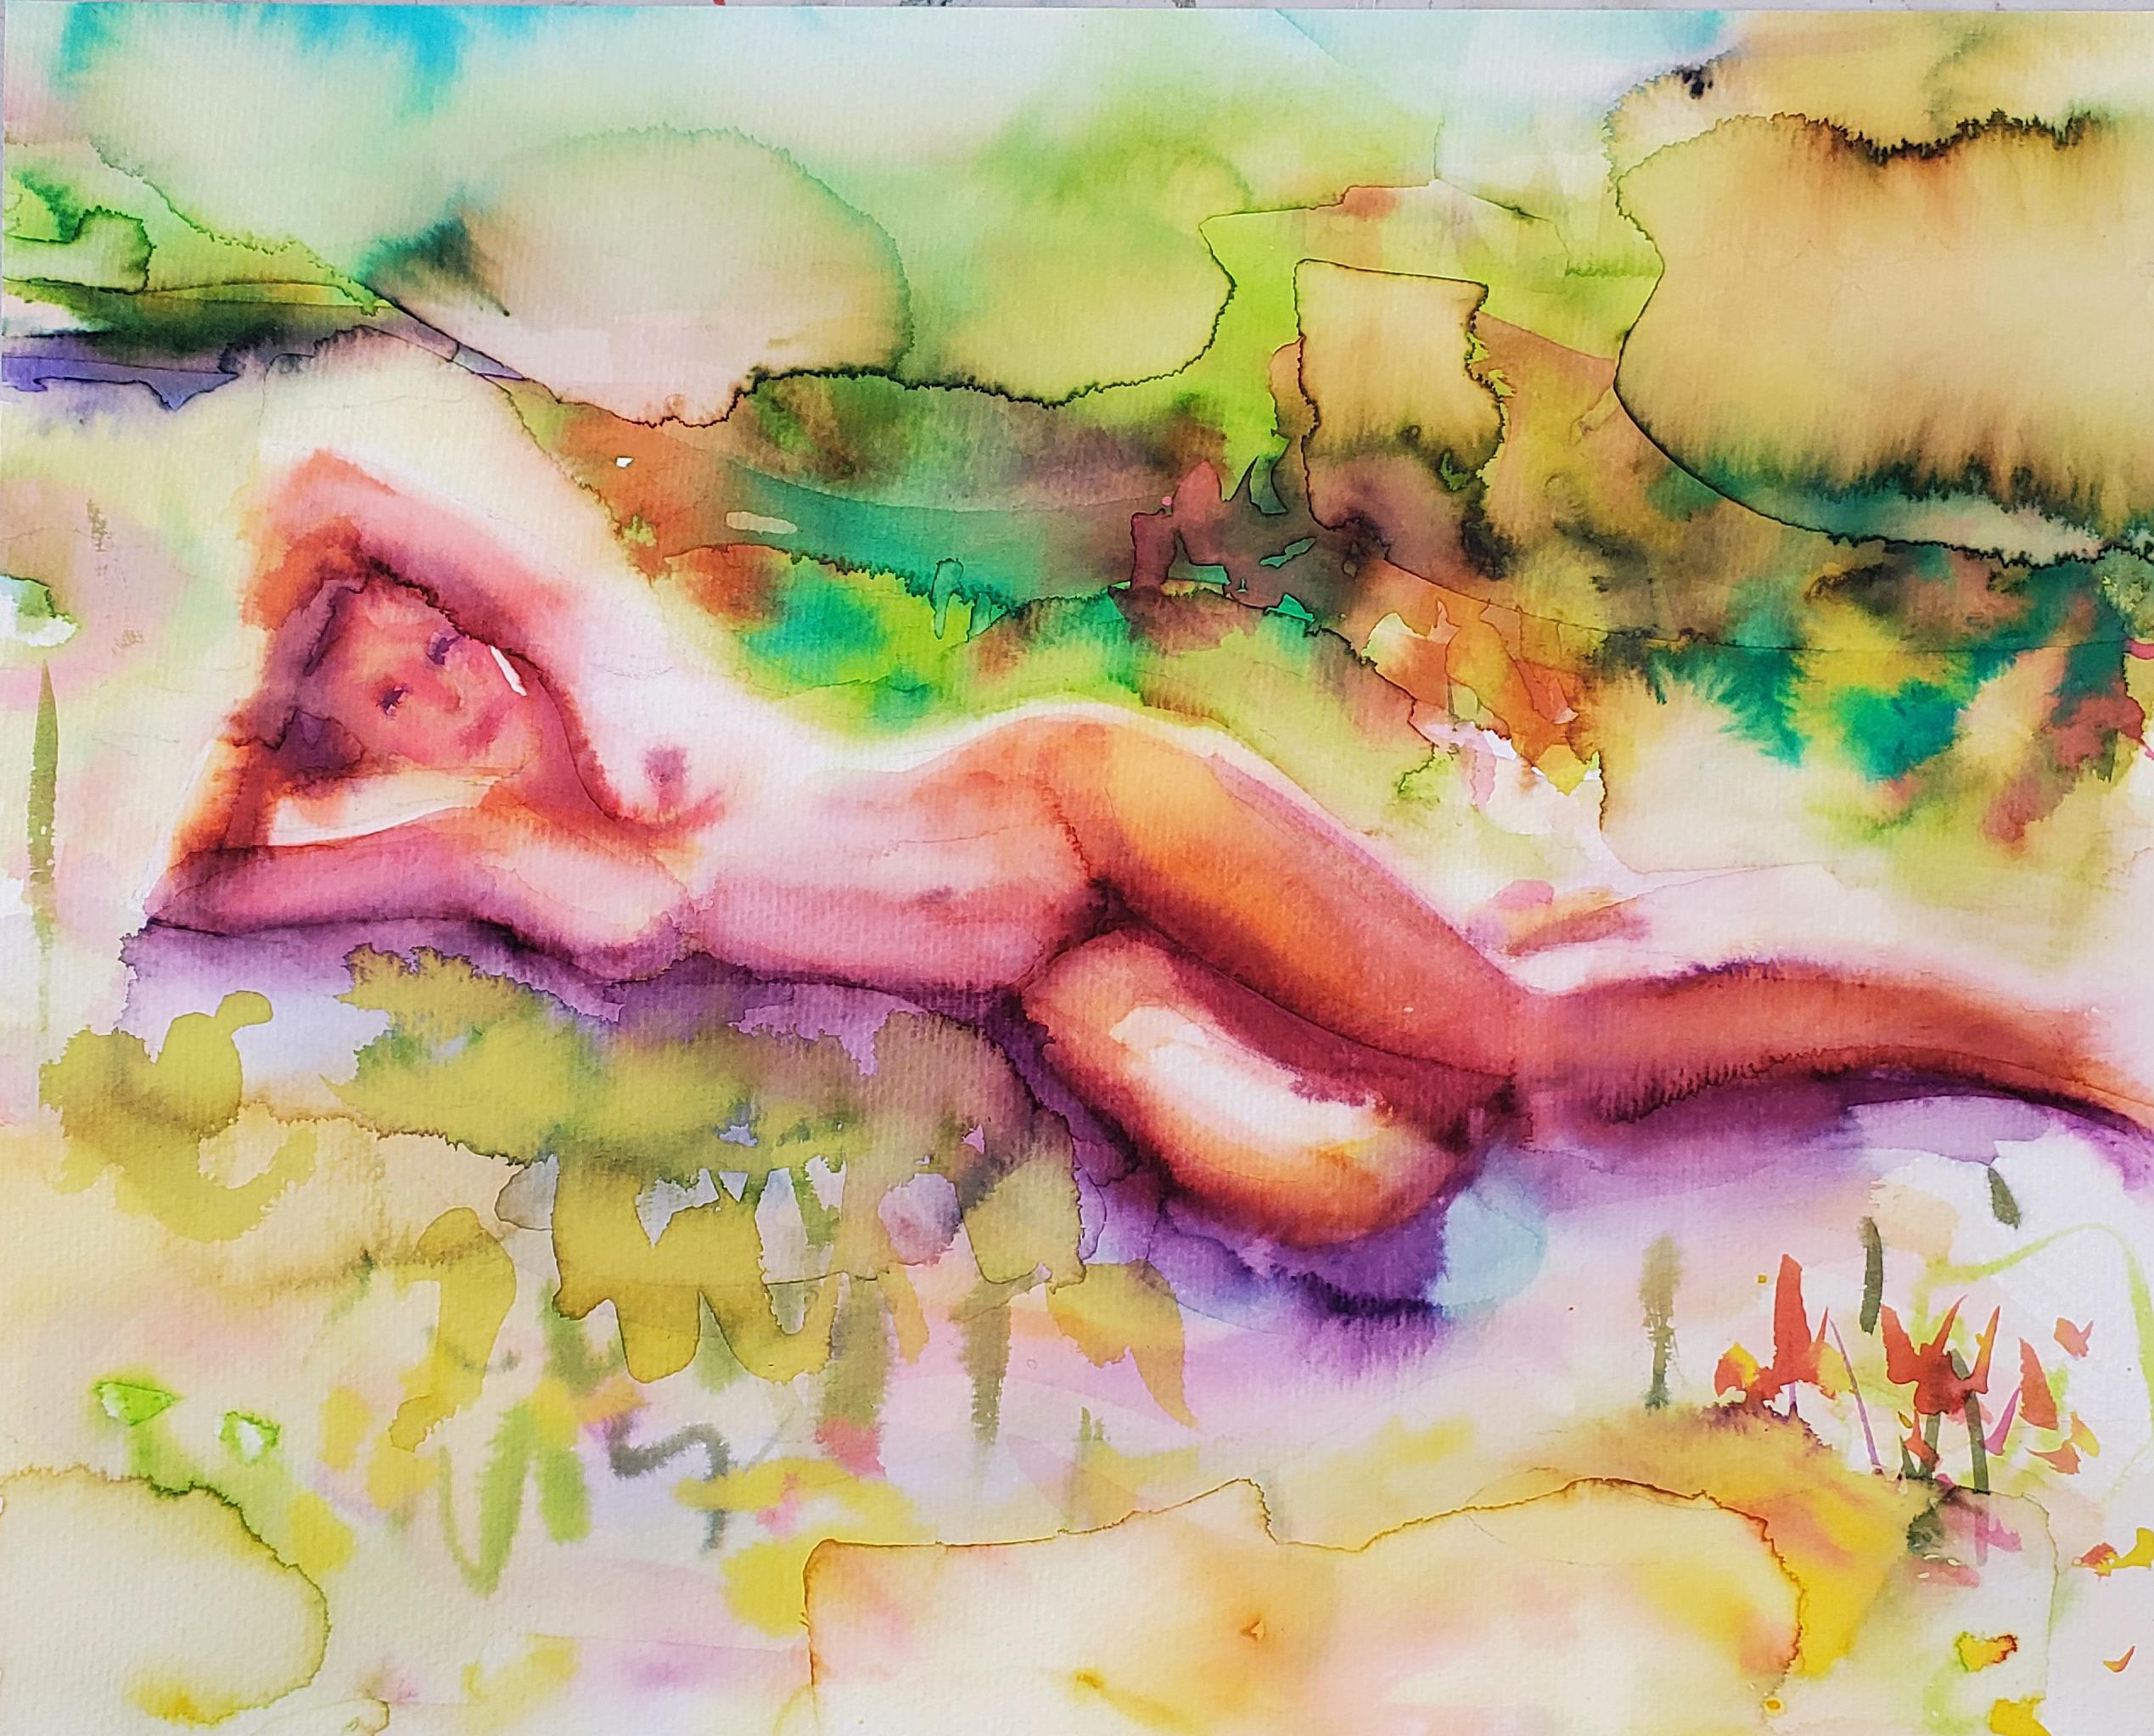  Elena Chestnykh Portrait - "Pretty Girl" Figurative Painting, Vibrant, Nude, Watercolor on Paper, Framed